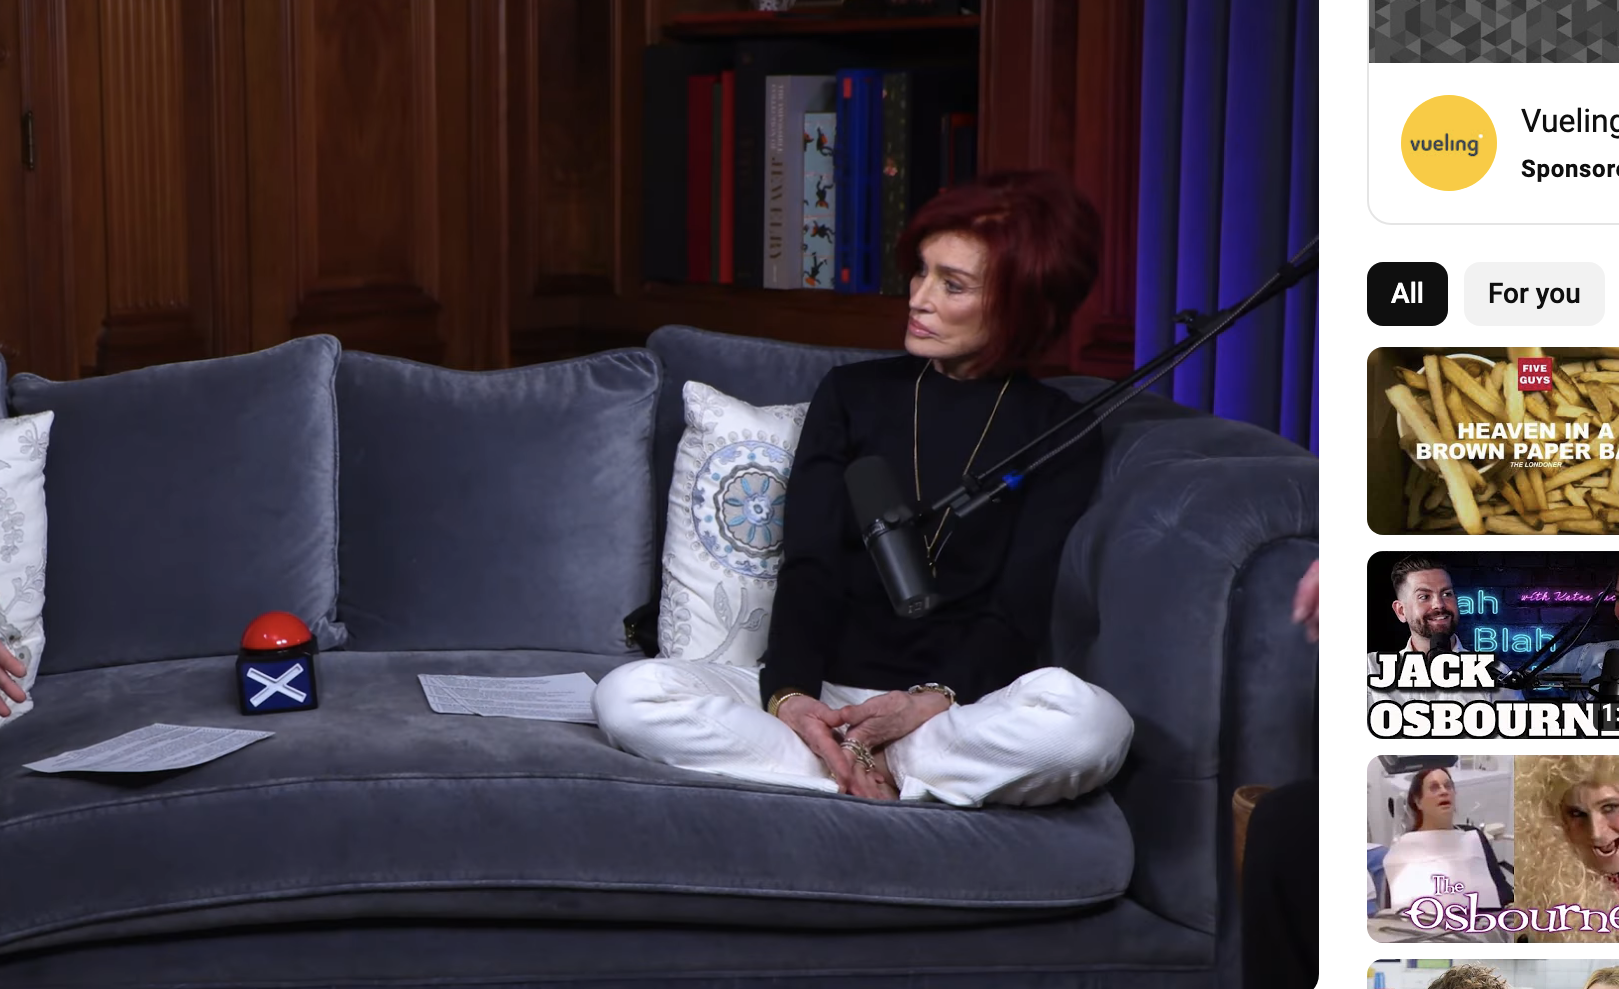 Two people seated in an interior set for an interview, with one wearing a dark outfit and the other in a red and black ensemble